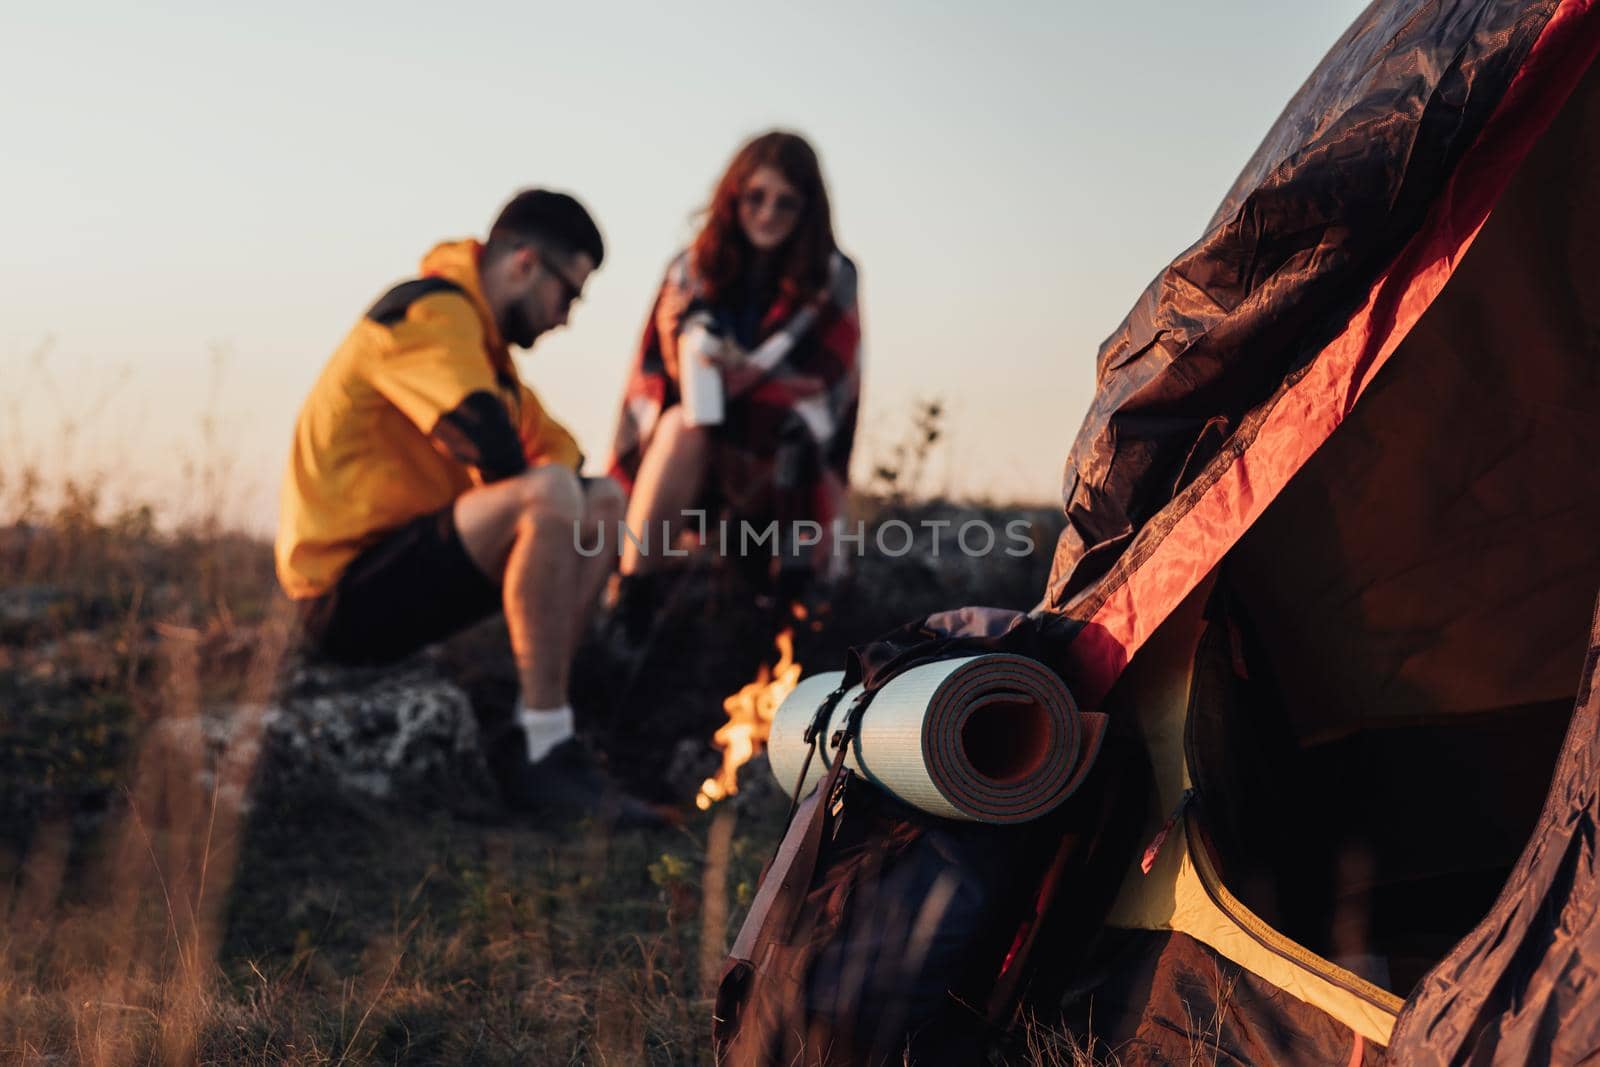 Backpack with Mat and Tent in Focus, on the Background Two Young Travelers Man and Woman Sitting Near Campfire During Sunset, Travel Concept